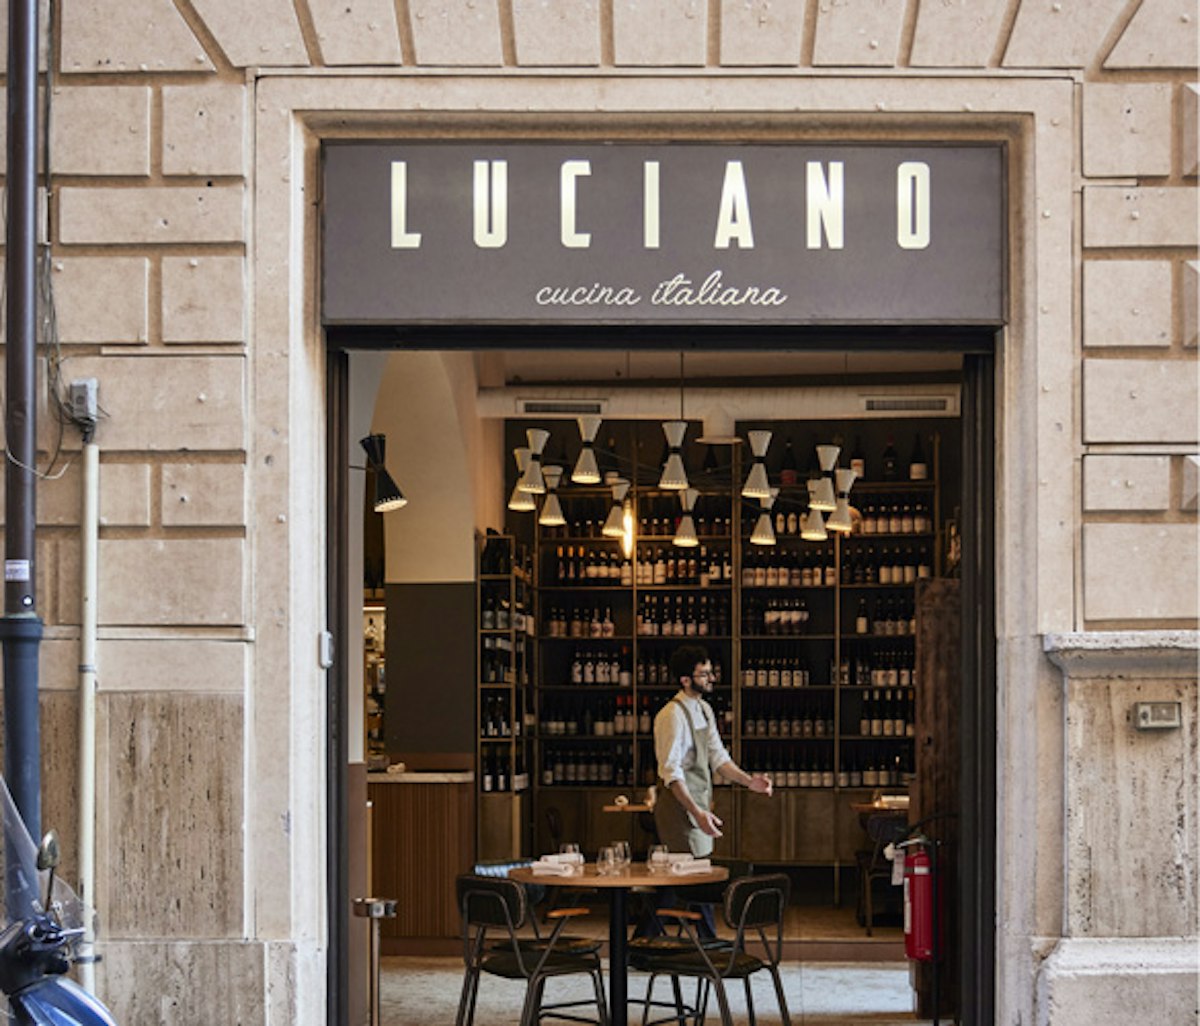 The entrance to a restaurant with a sign that says lucano.